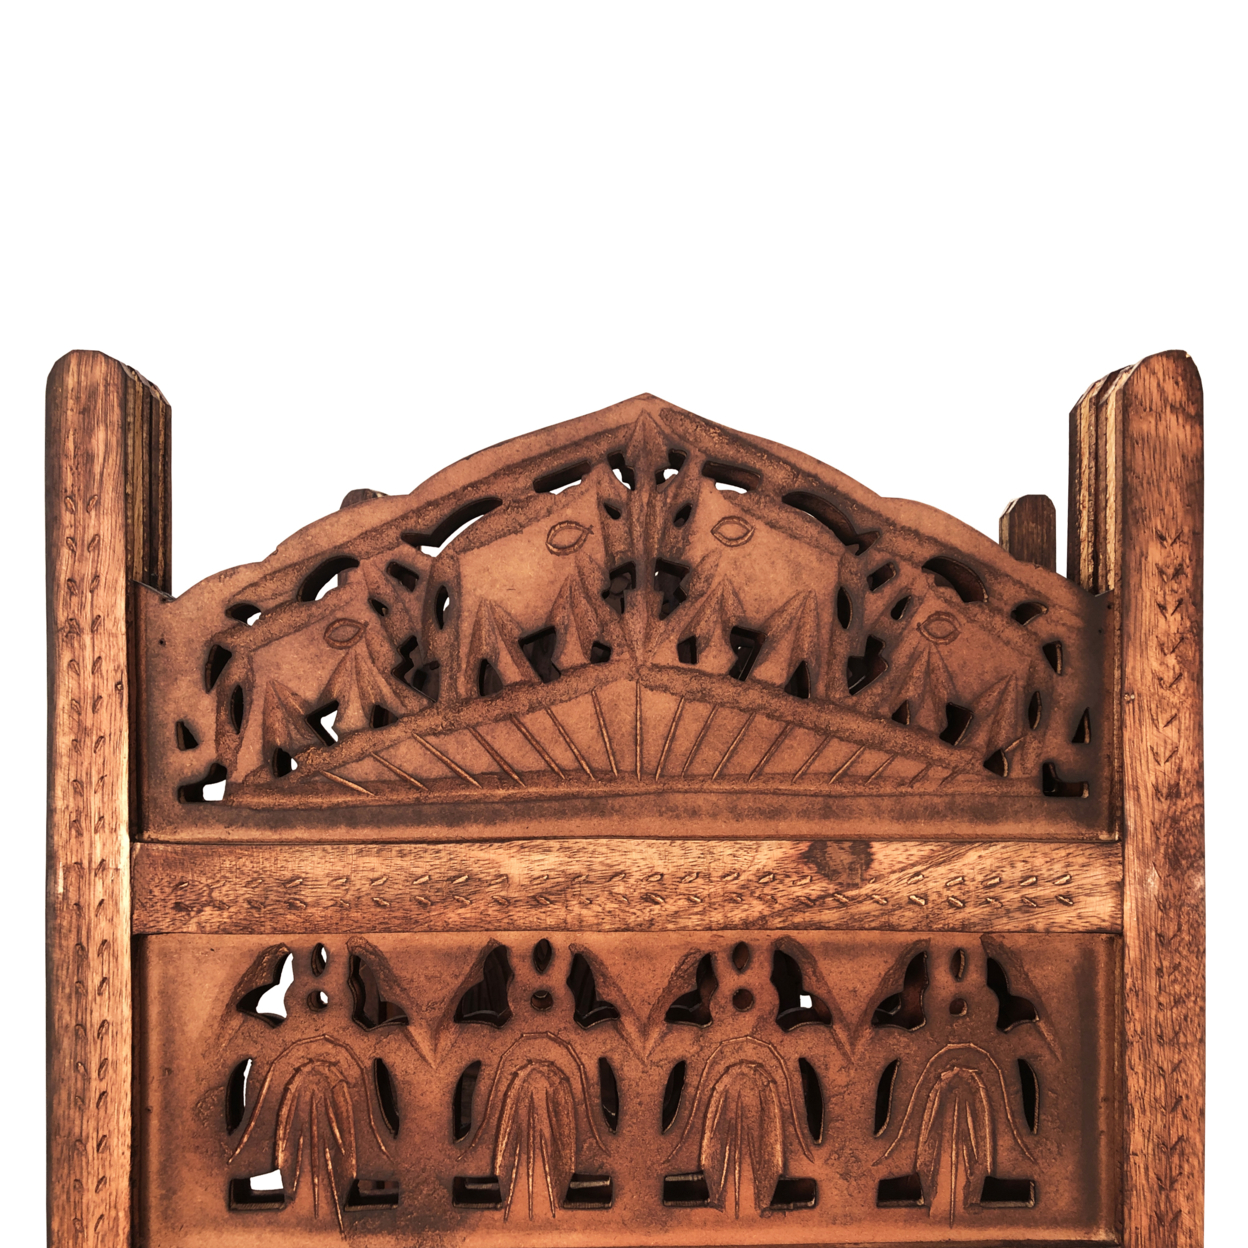 80 Inch Handcrafted 4 Panel Carved Wood Room Divider Screen, Intricate Cutout Details, Brown- Saltoro Sherpi